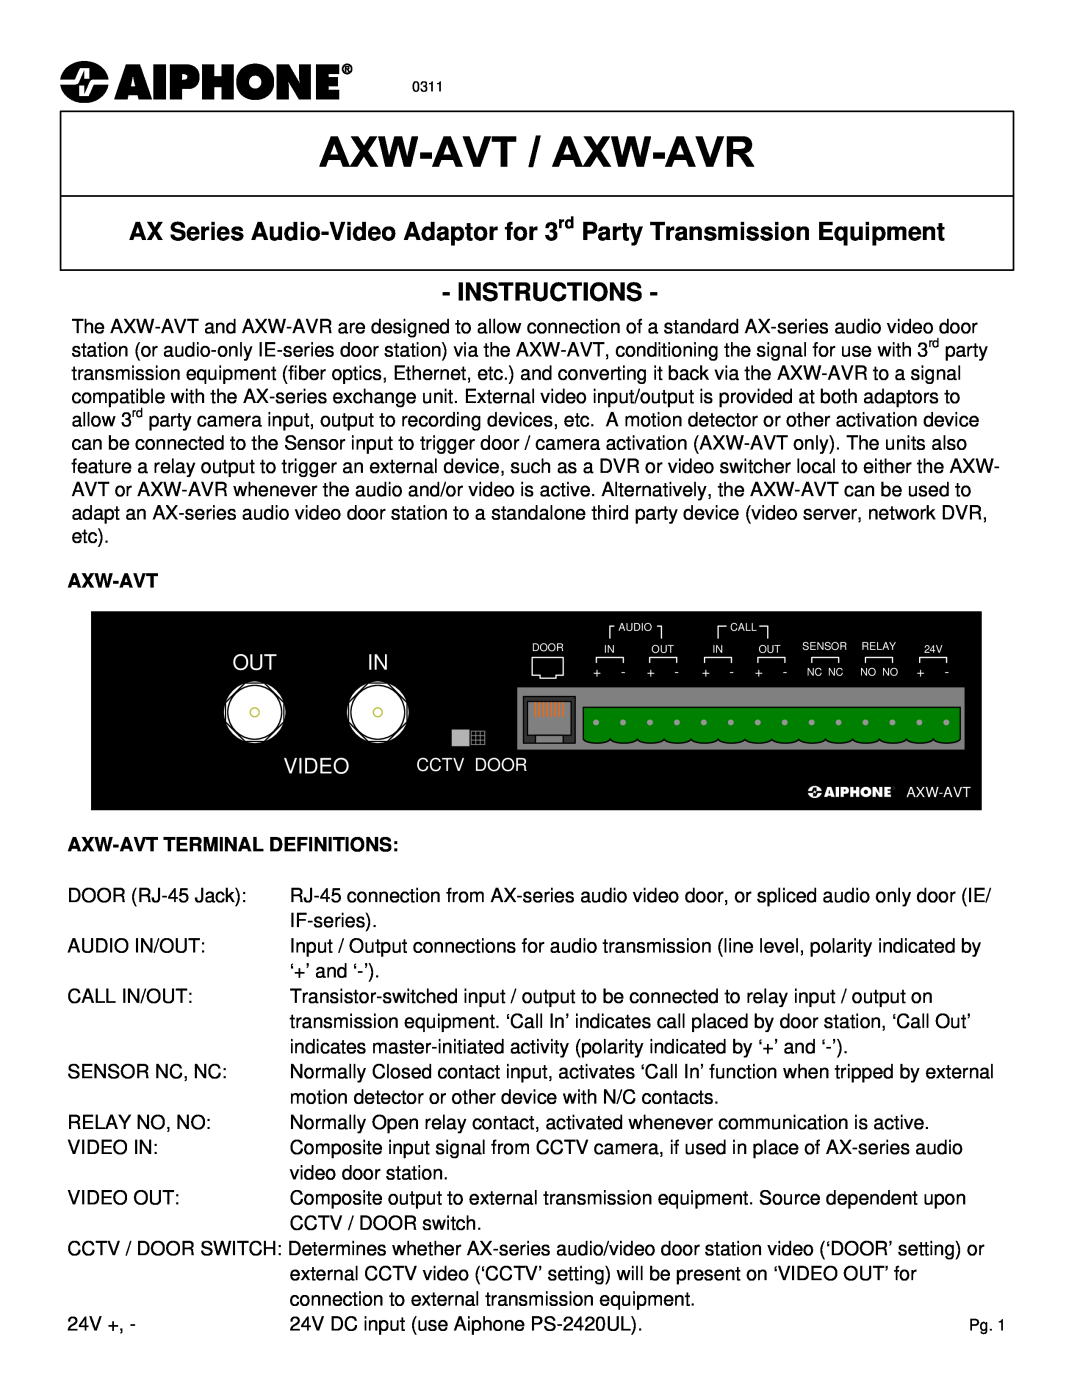 Aiphone AXW-AVR, AXW-AVT manual Out In, Video, Instructions, Axw-Avtterminal Definitions 